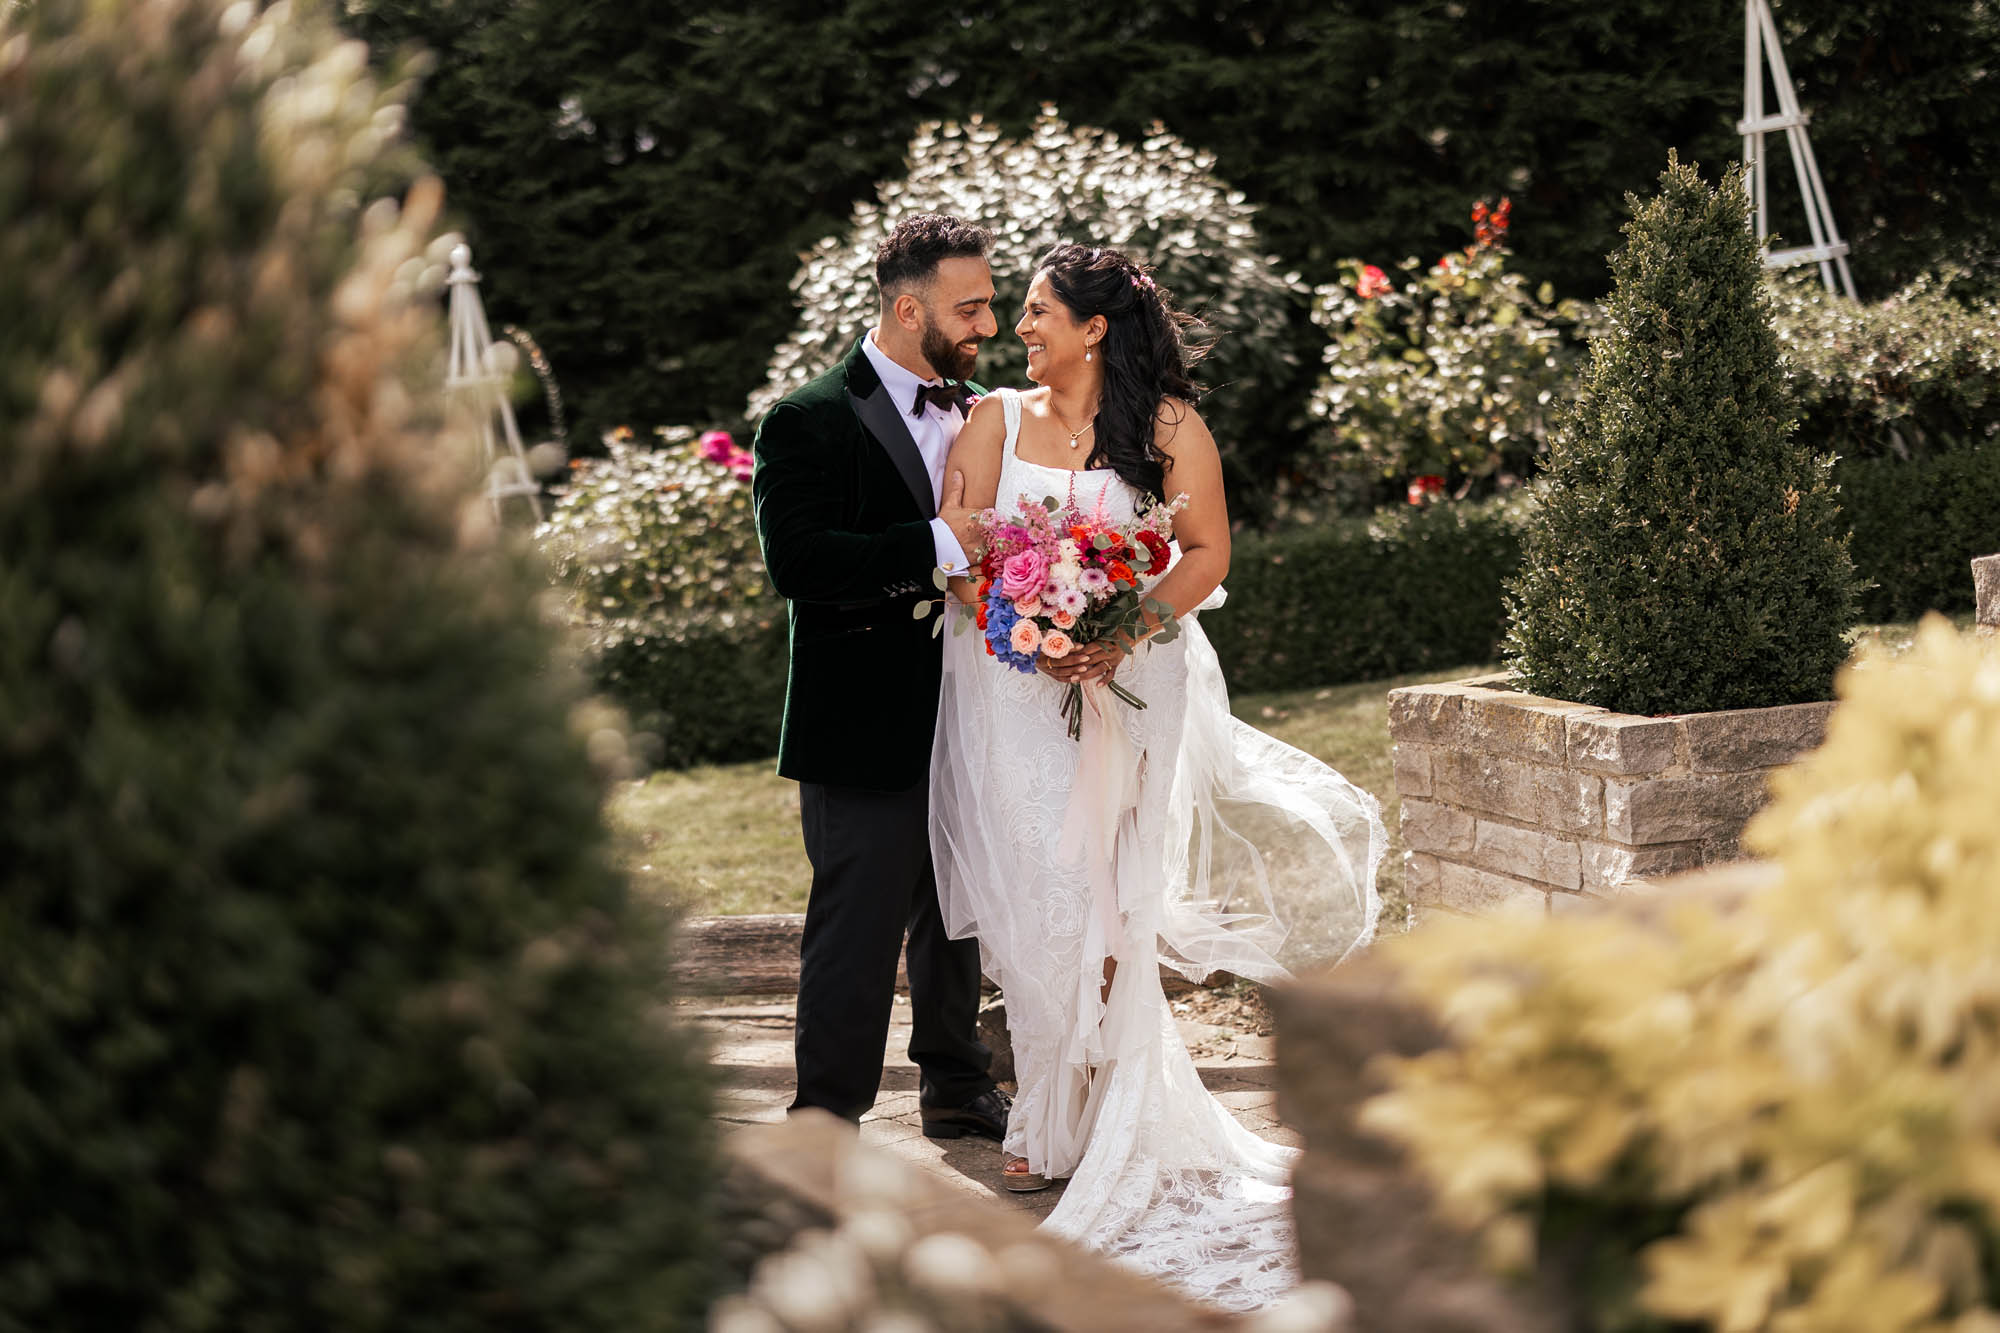 Newlyweds at The Ferry House in Kent. She's holding colourful flowers and the sun is shining. By Daniel Luke Photography